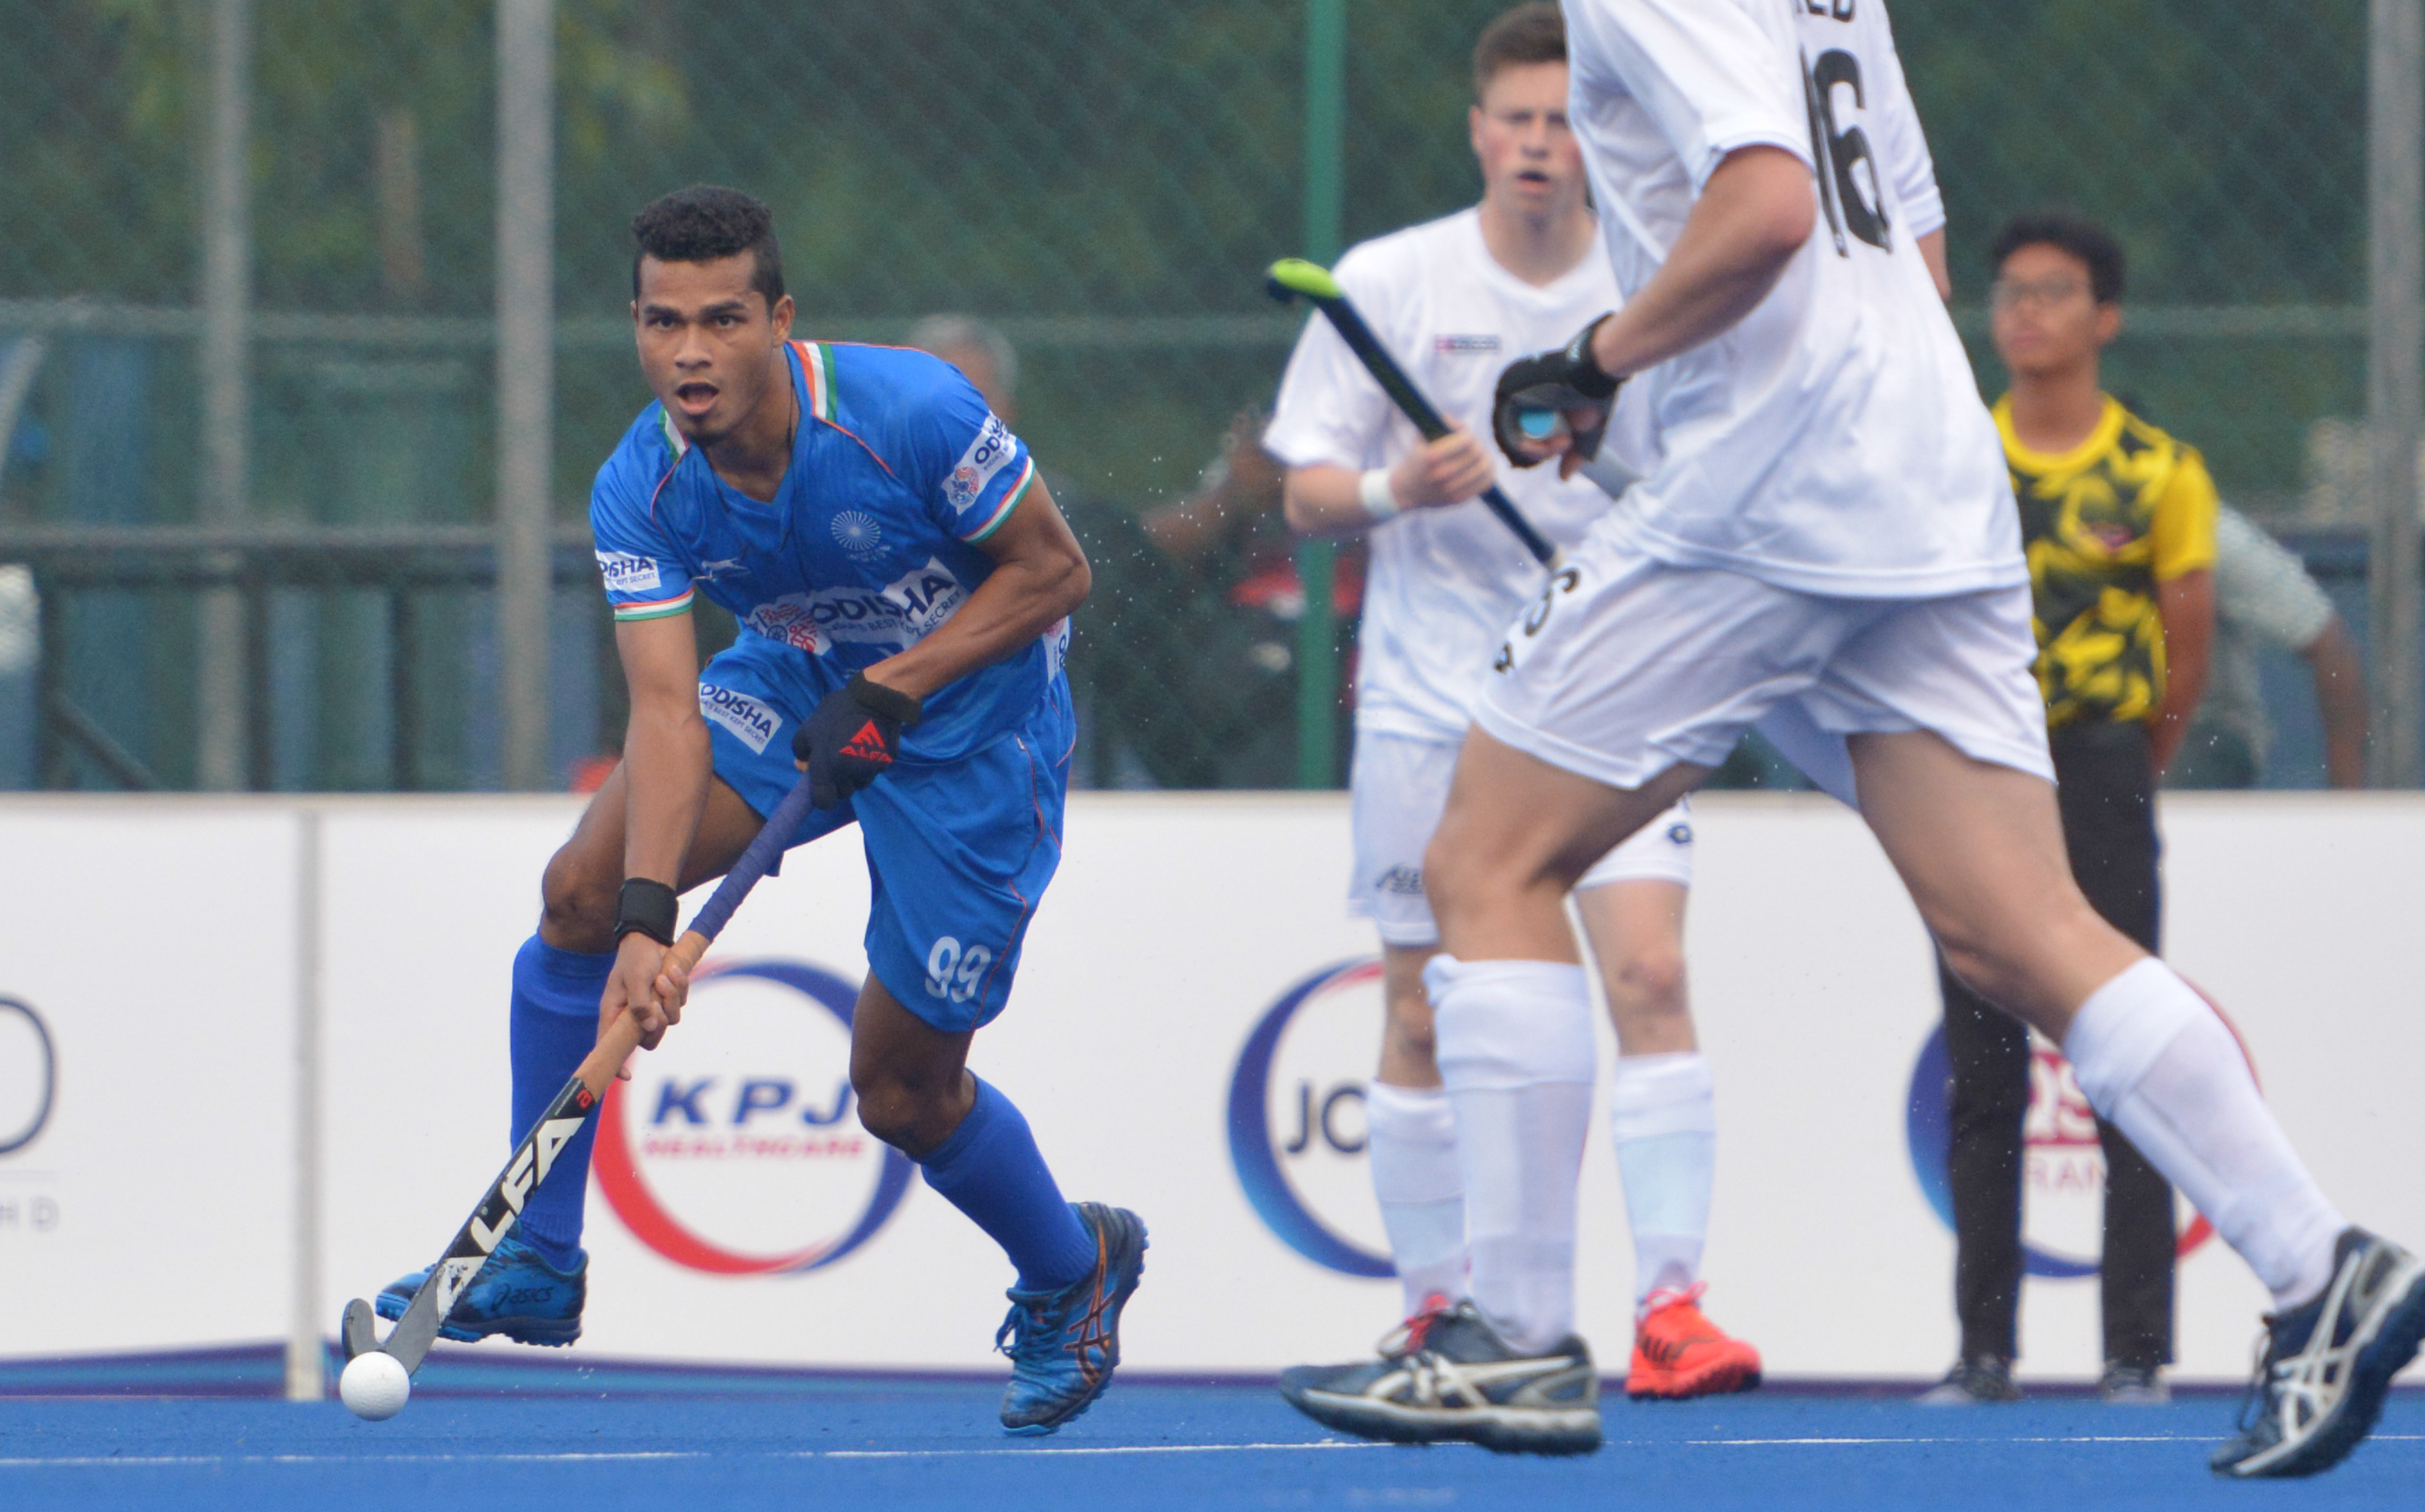 Sultan of Johor Cup | Shilanand Lakra’s brace helps India beat Australia and qualify for final